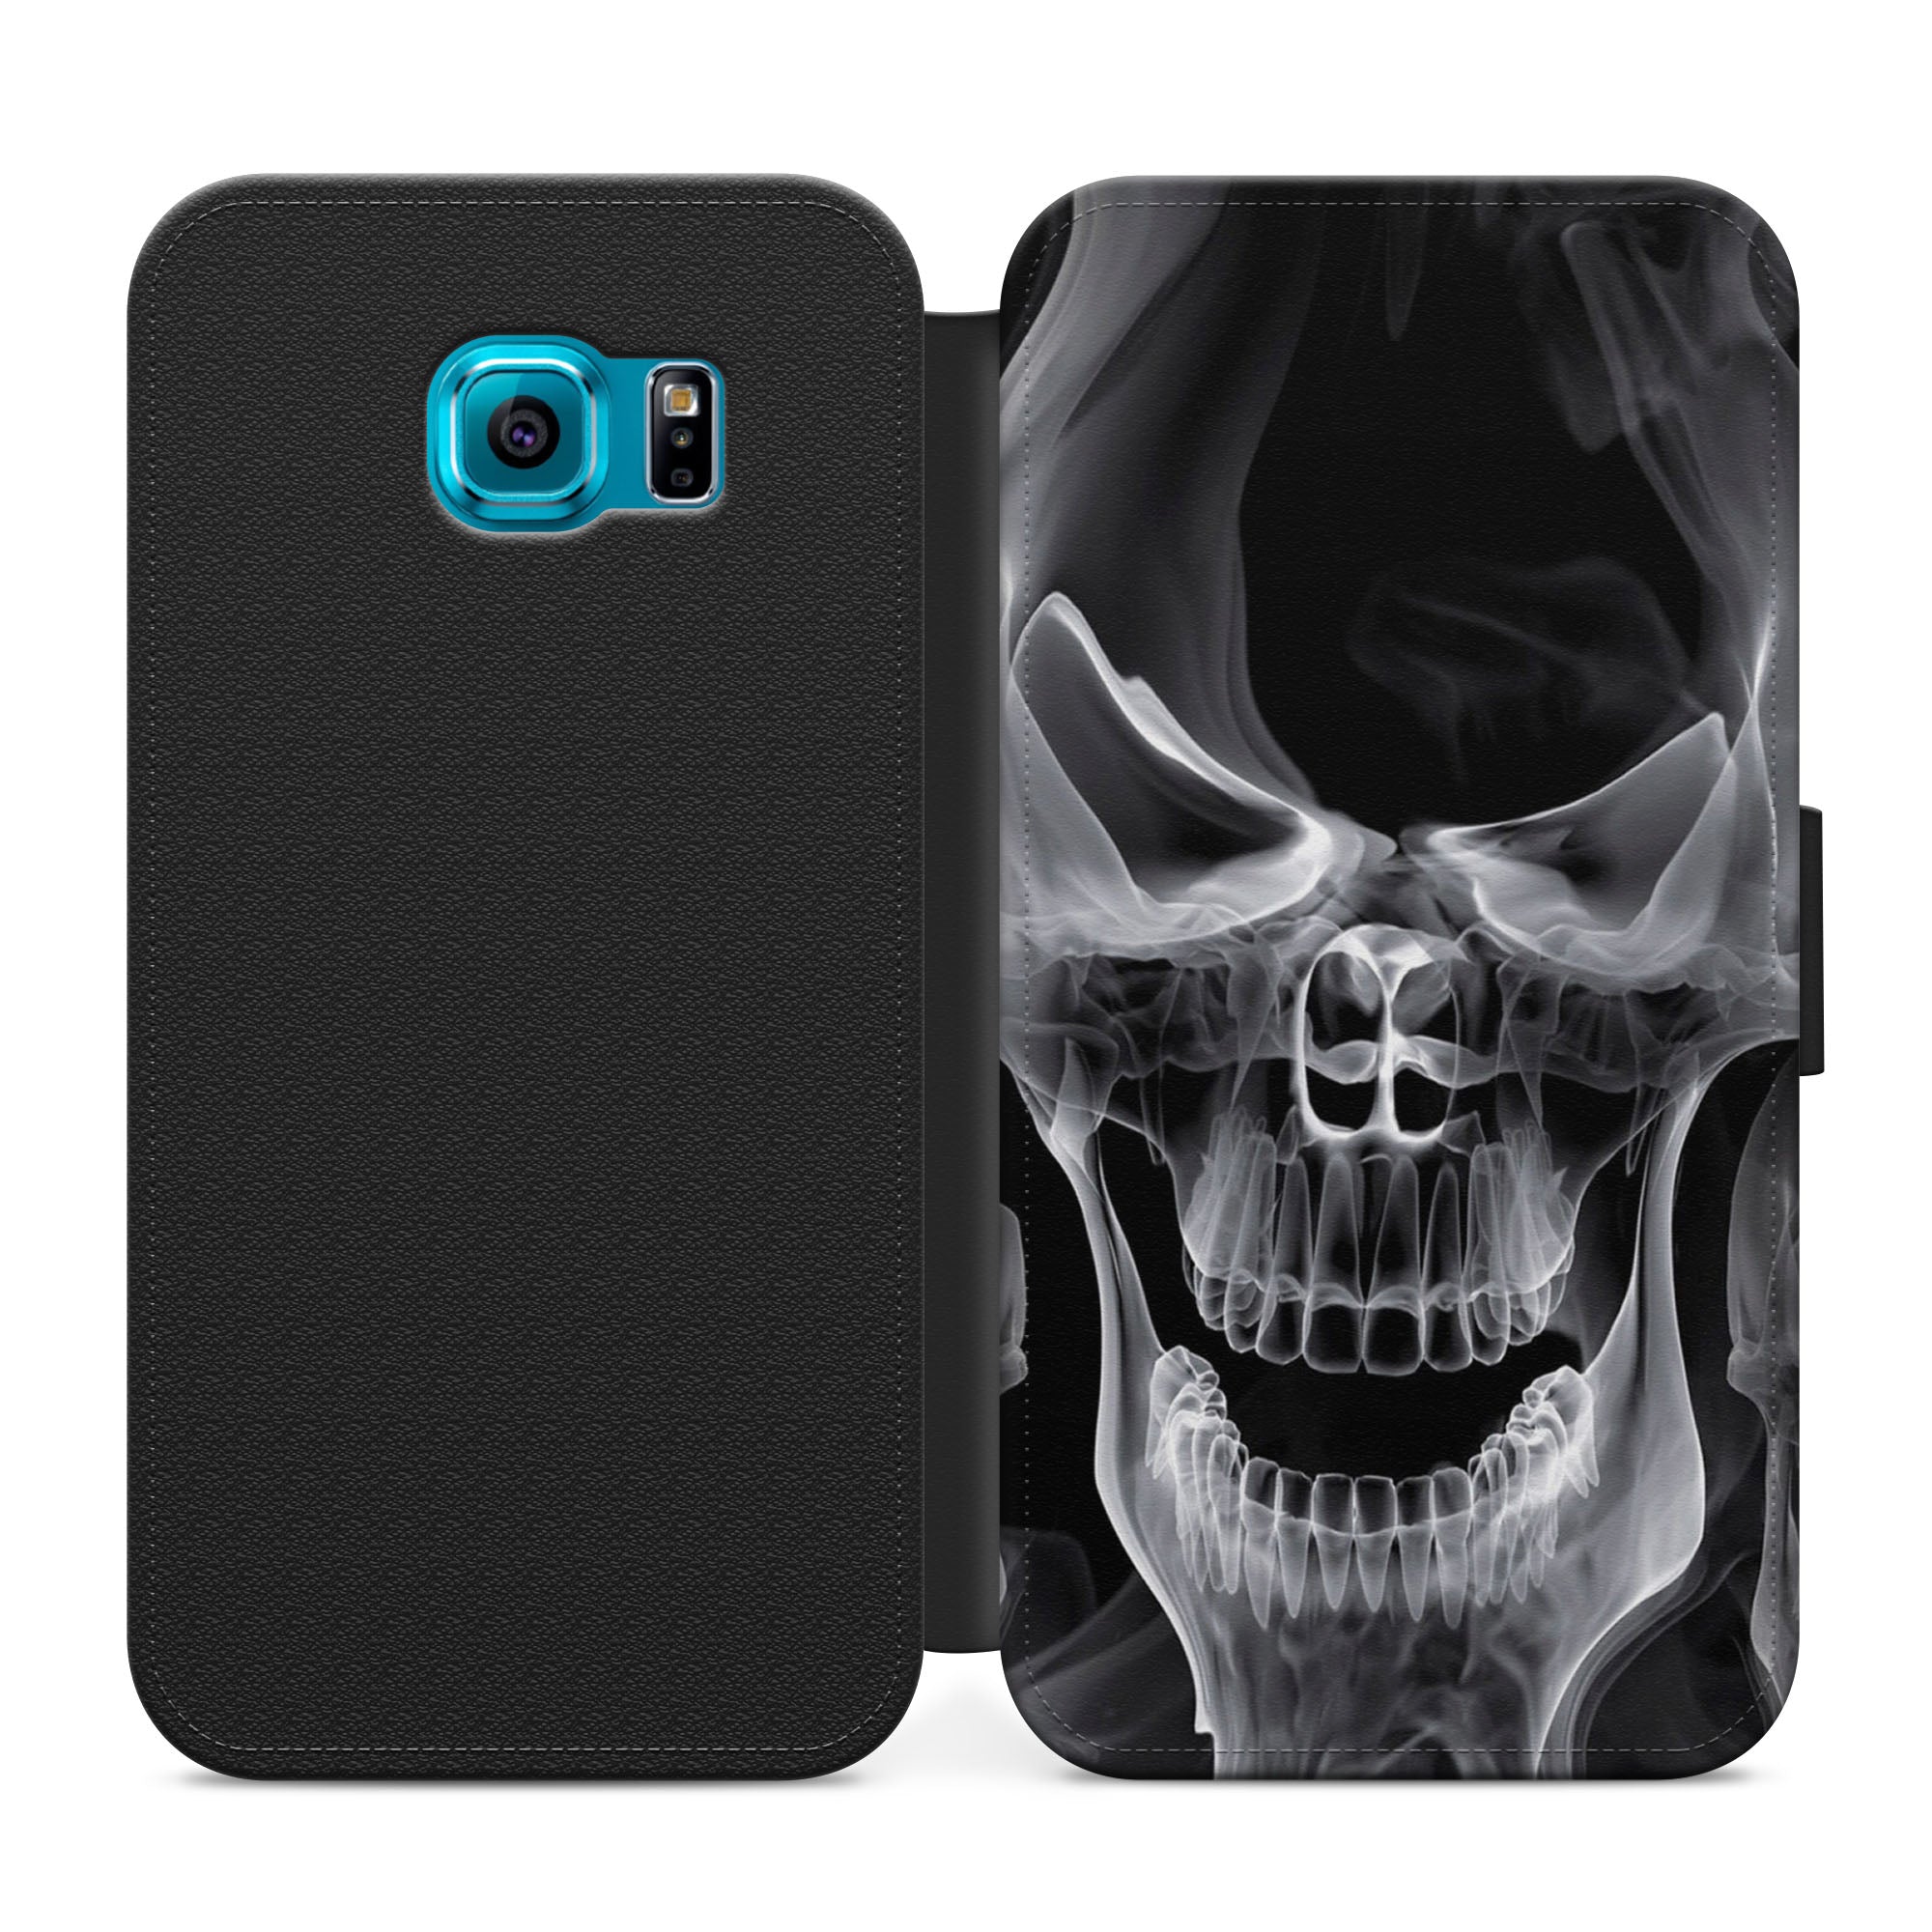 Smokey Skull Faux Leather Flip Case Wallet for iPhone / Samsung